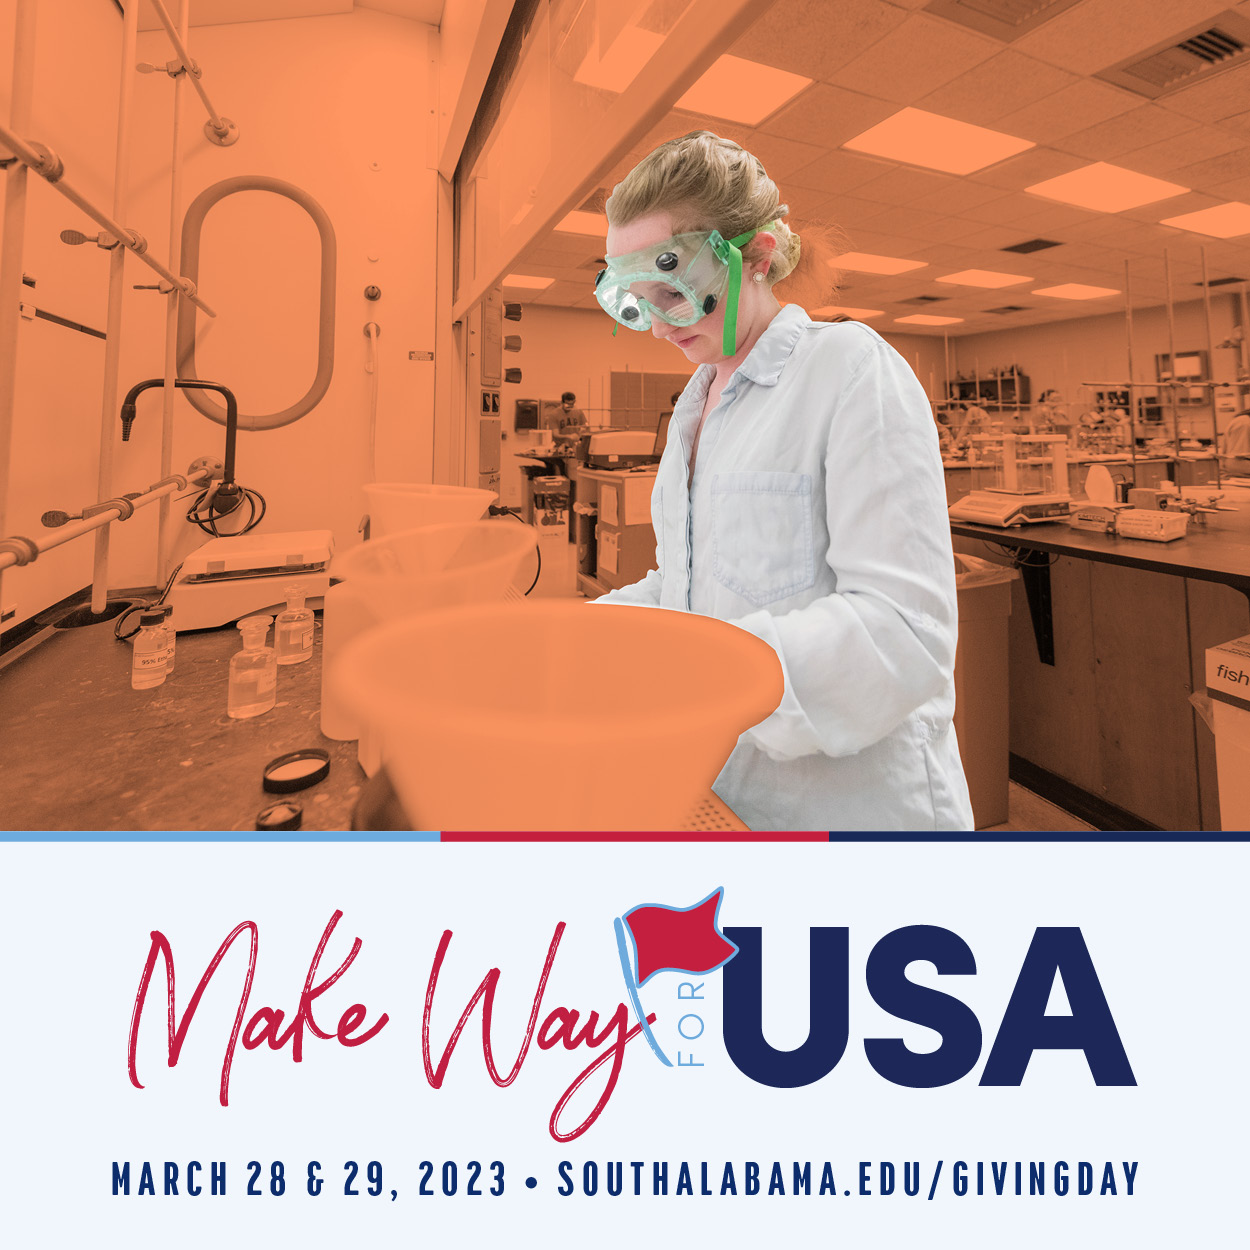 Make Way for USA March 28 and 29, 2023 Southalabama.edu/givingday with image of student working in lab on campus.